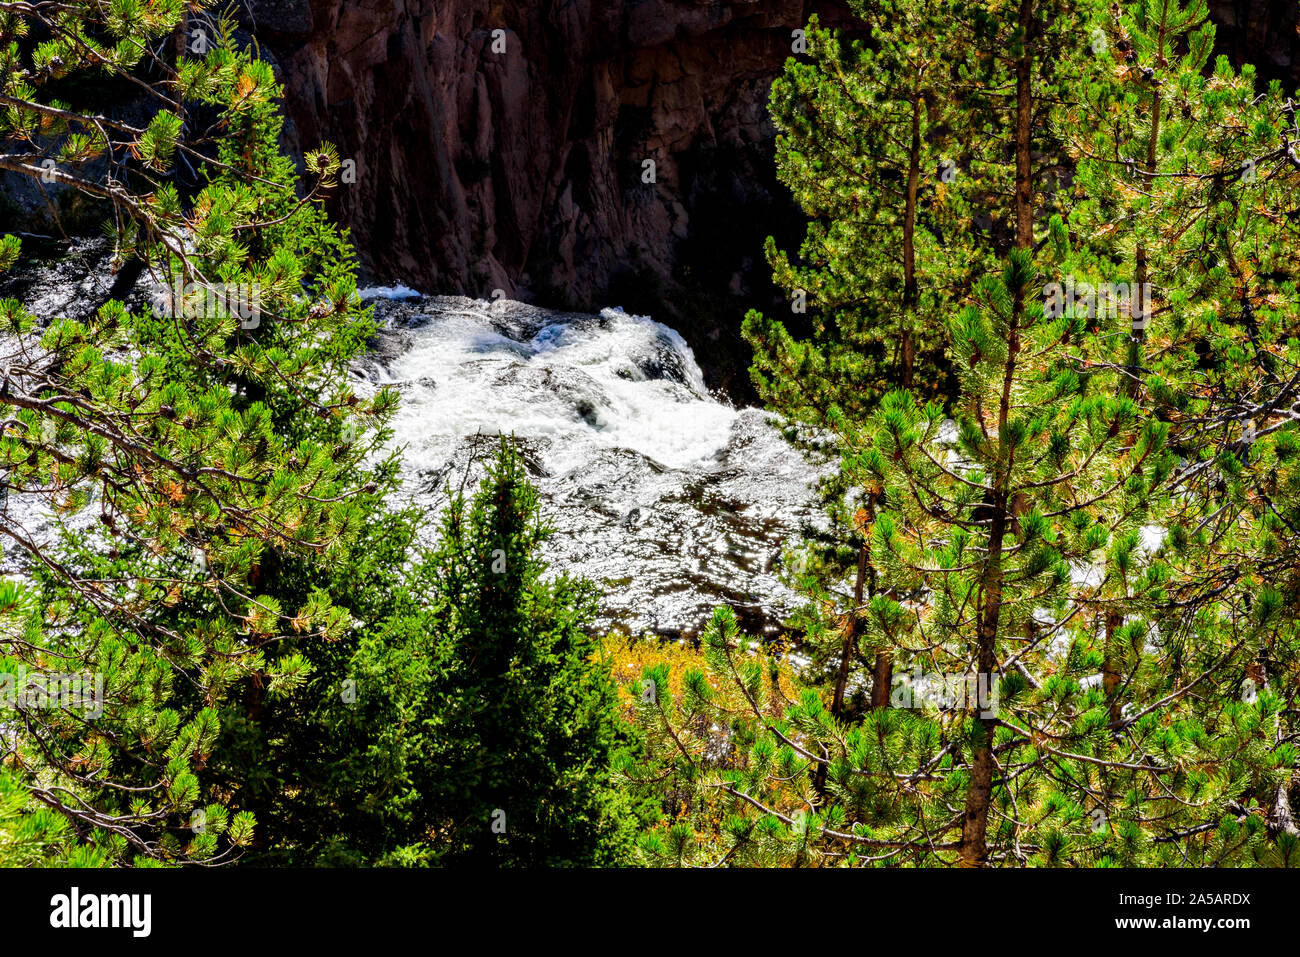 White water river running through canyon with tall green pine trees. Stock Photo